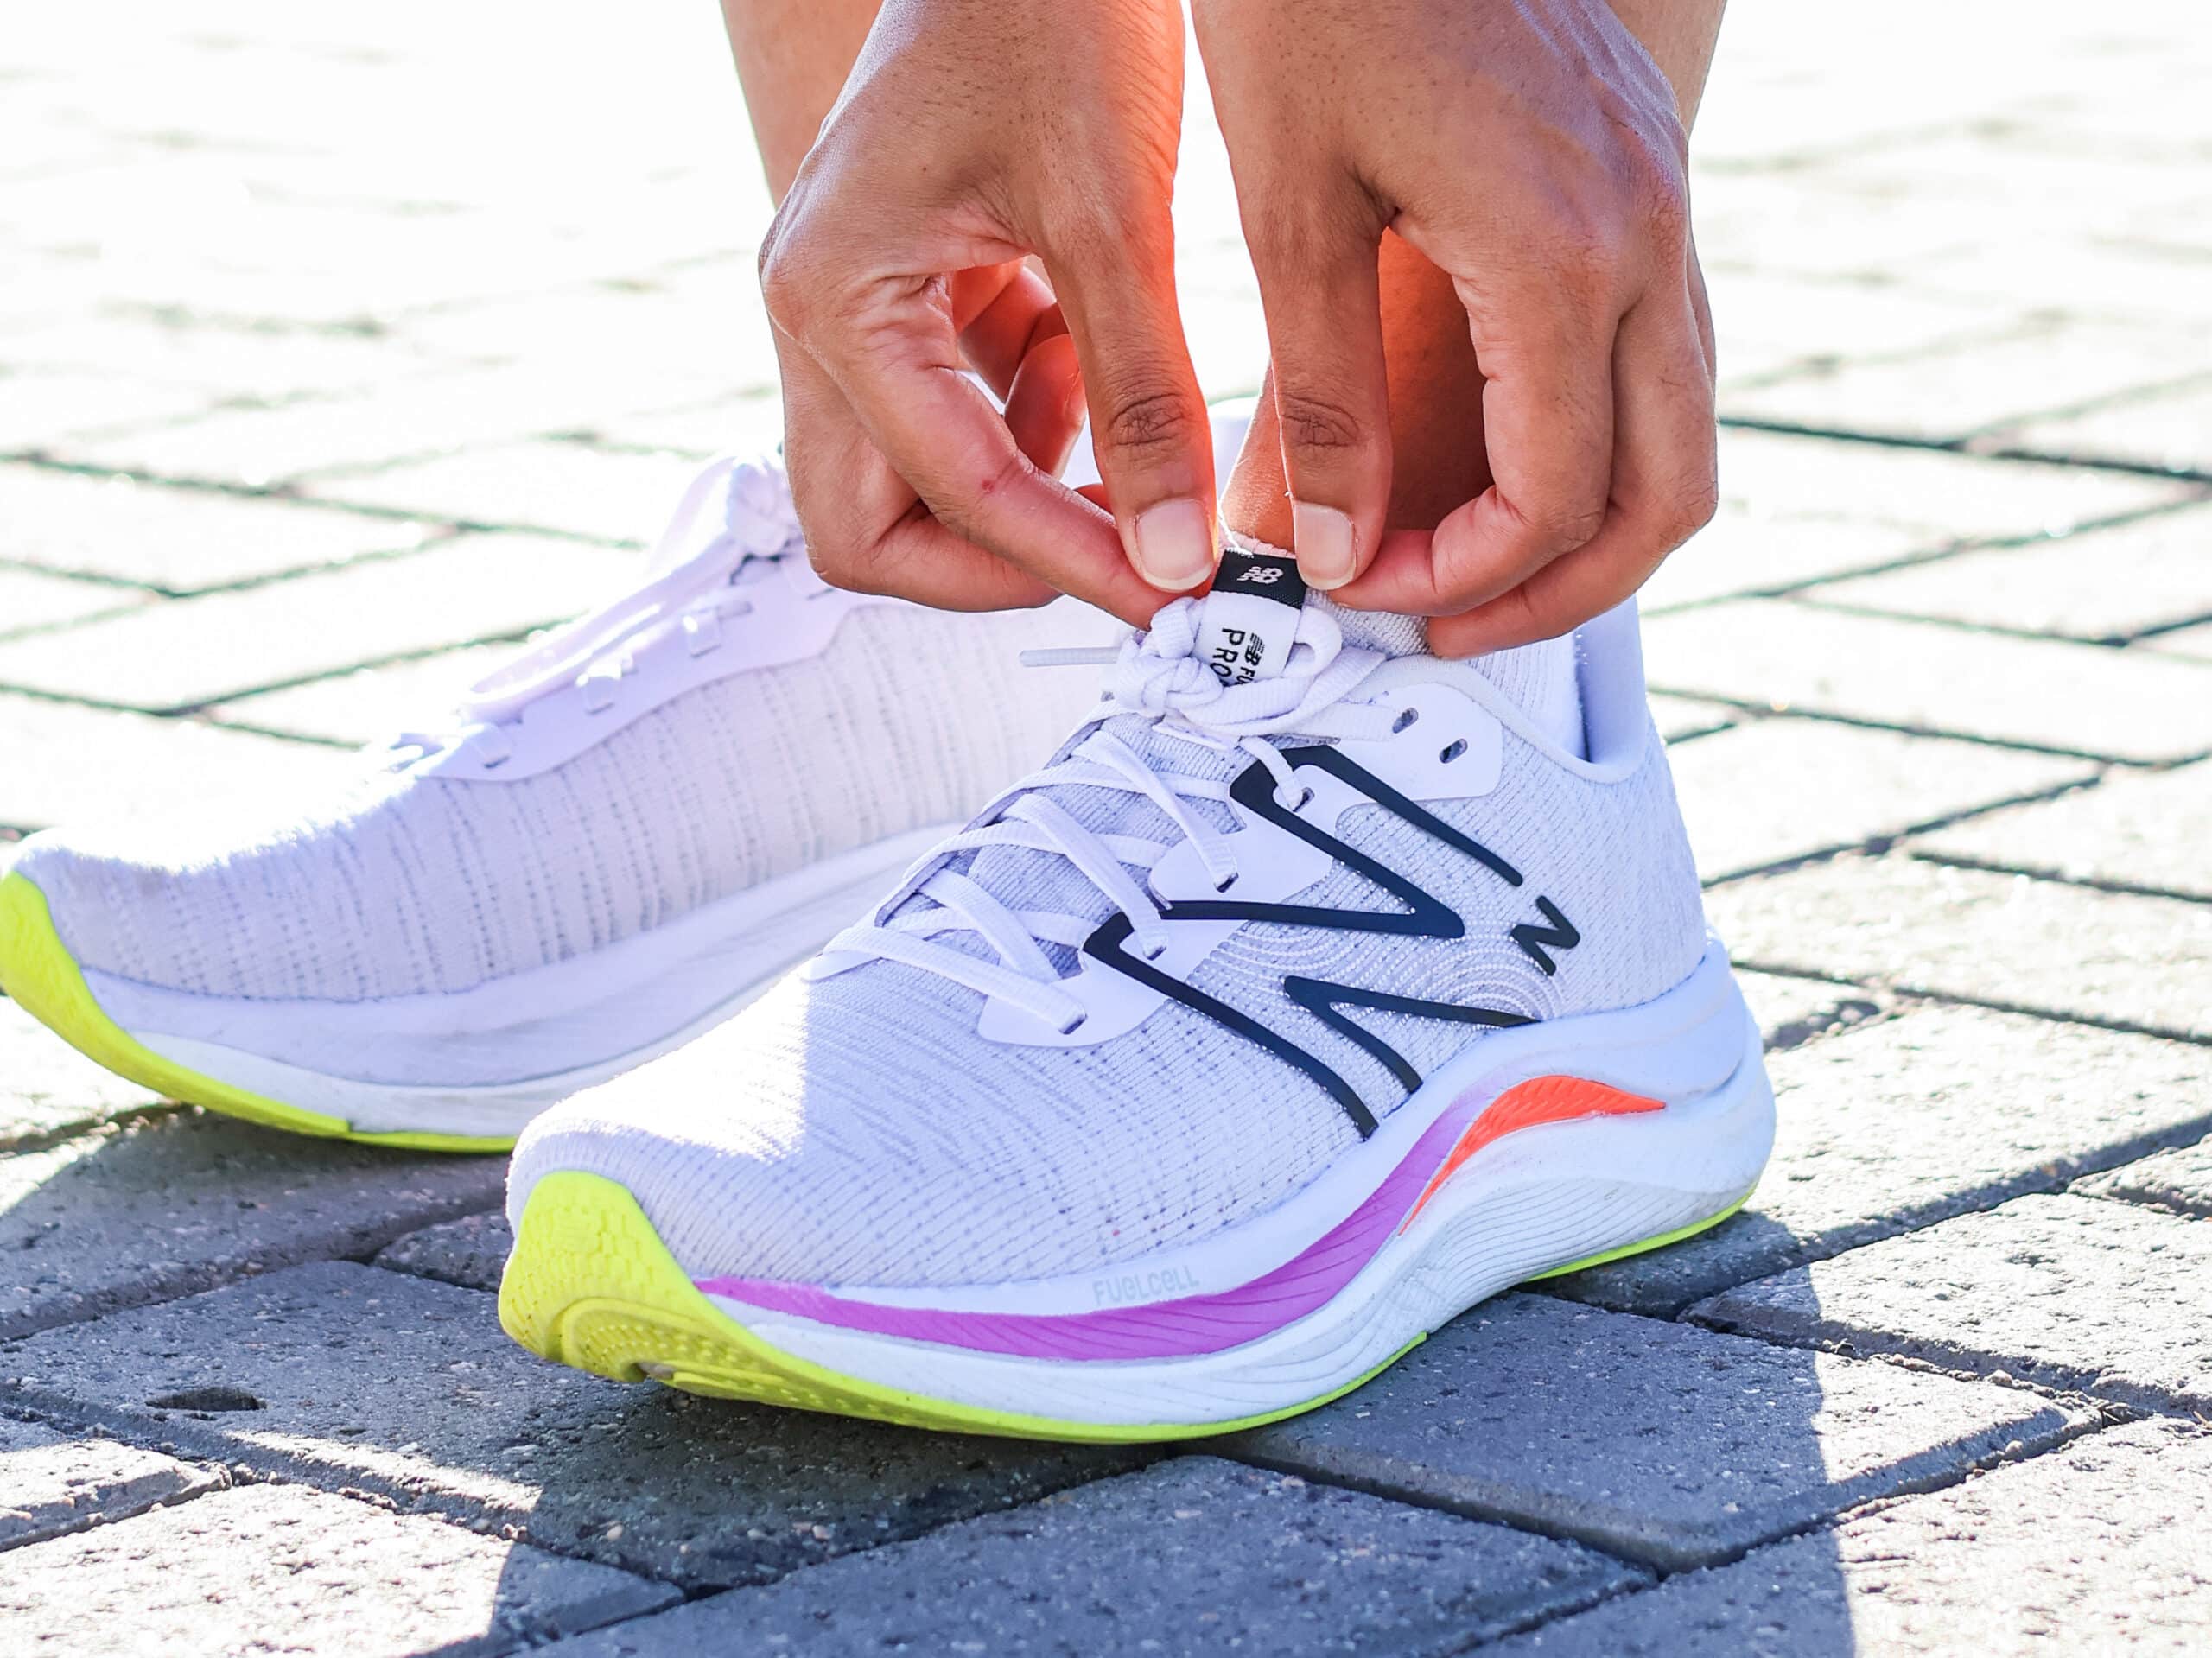 New balance fuel cell propel v4 is an affordable speed shoe for the road